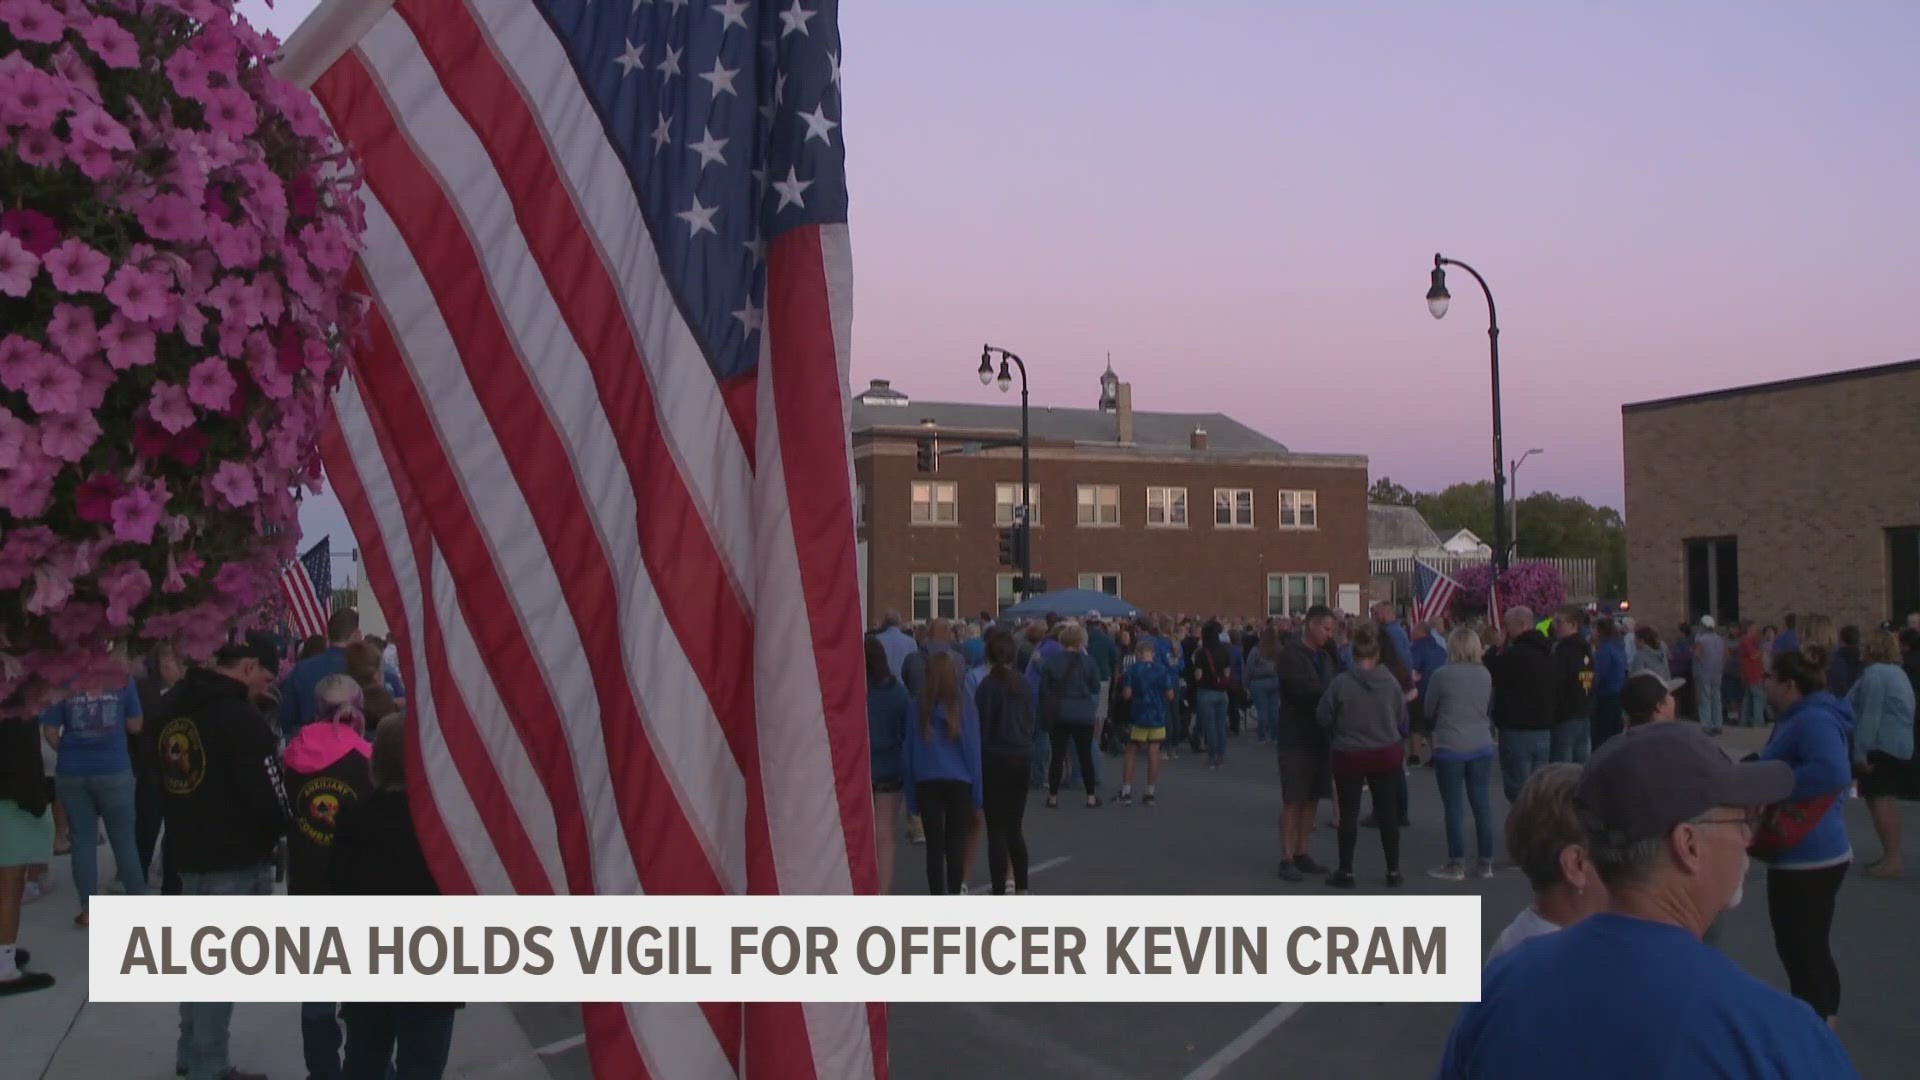 "He truly cared about his community and the people he served," said Algona Mayor Rick Murphy at the vigil.